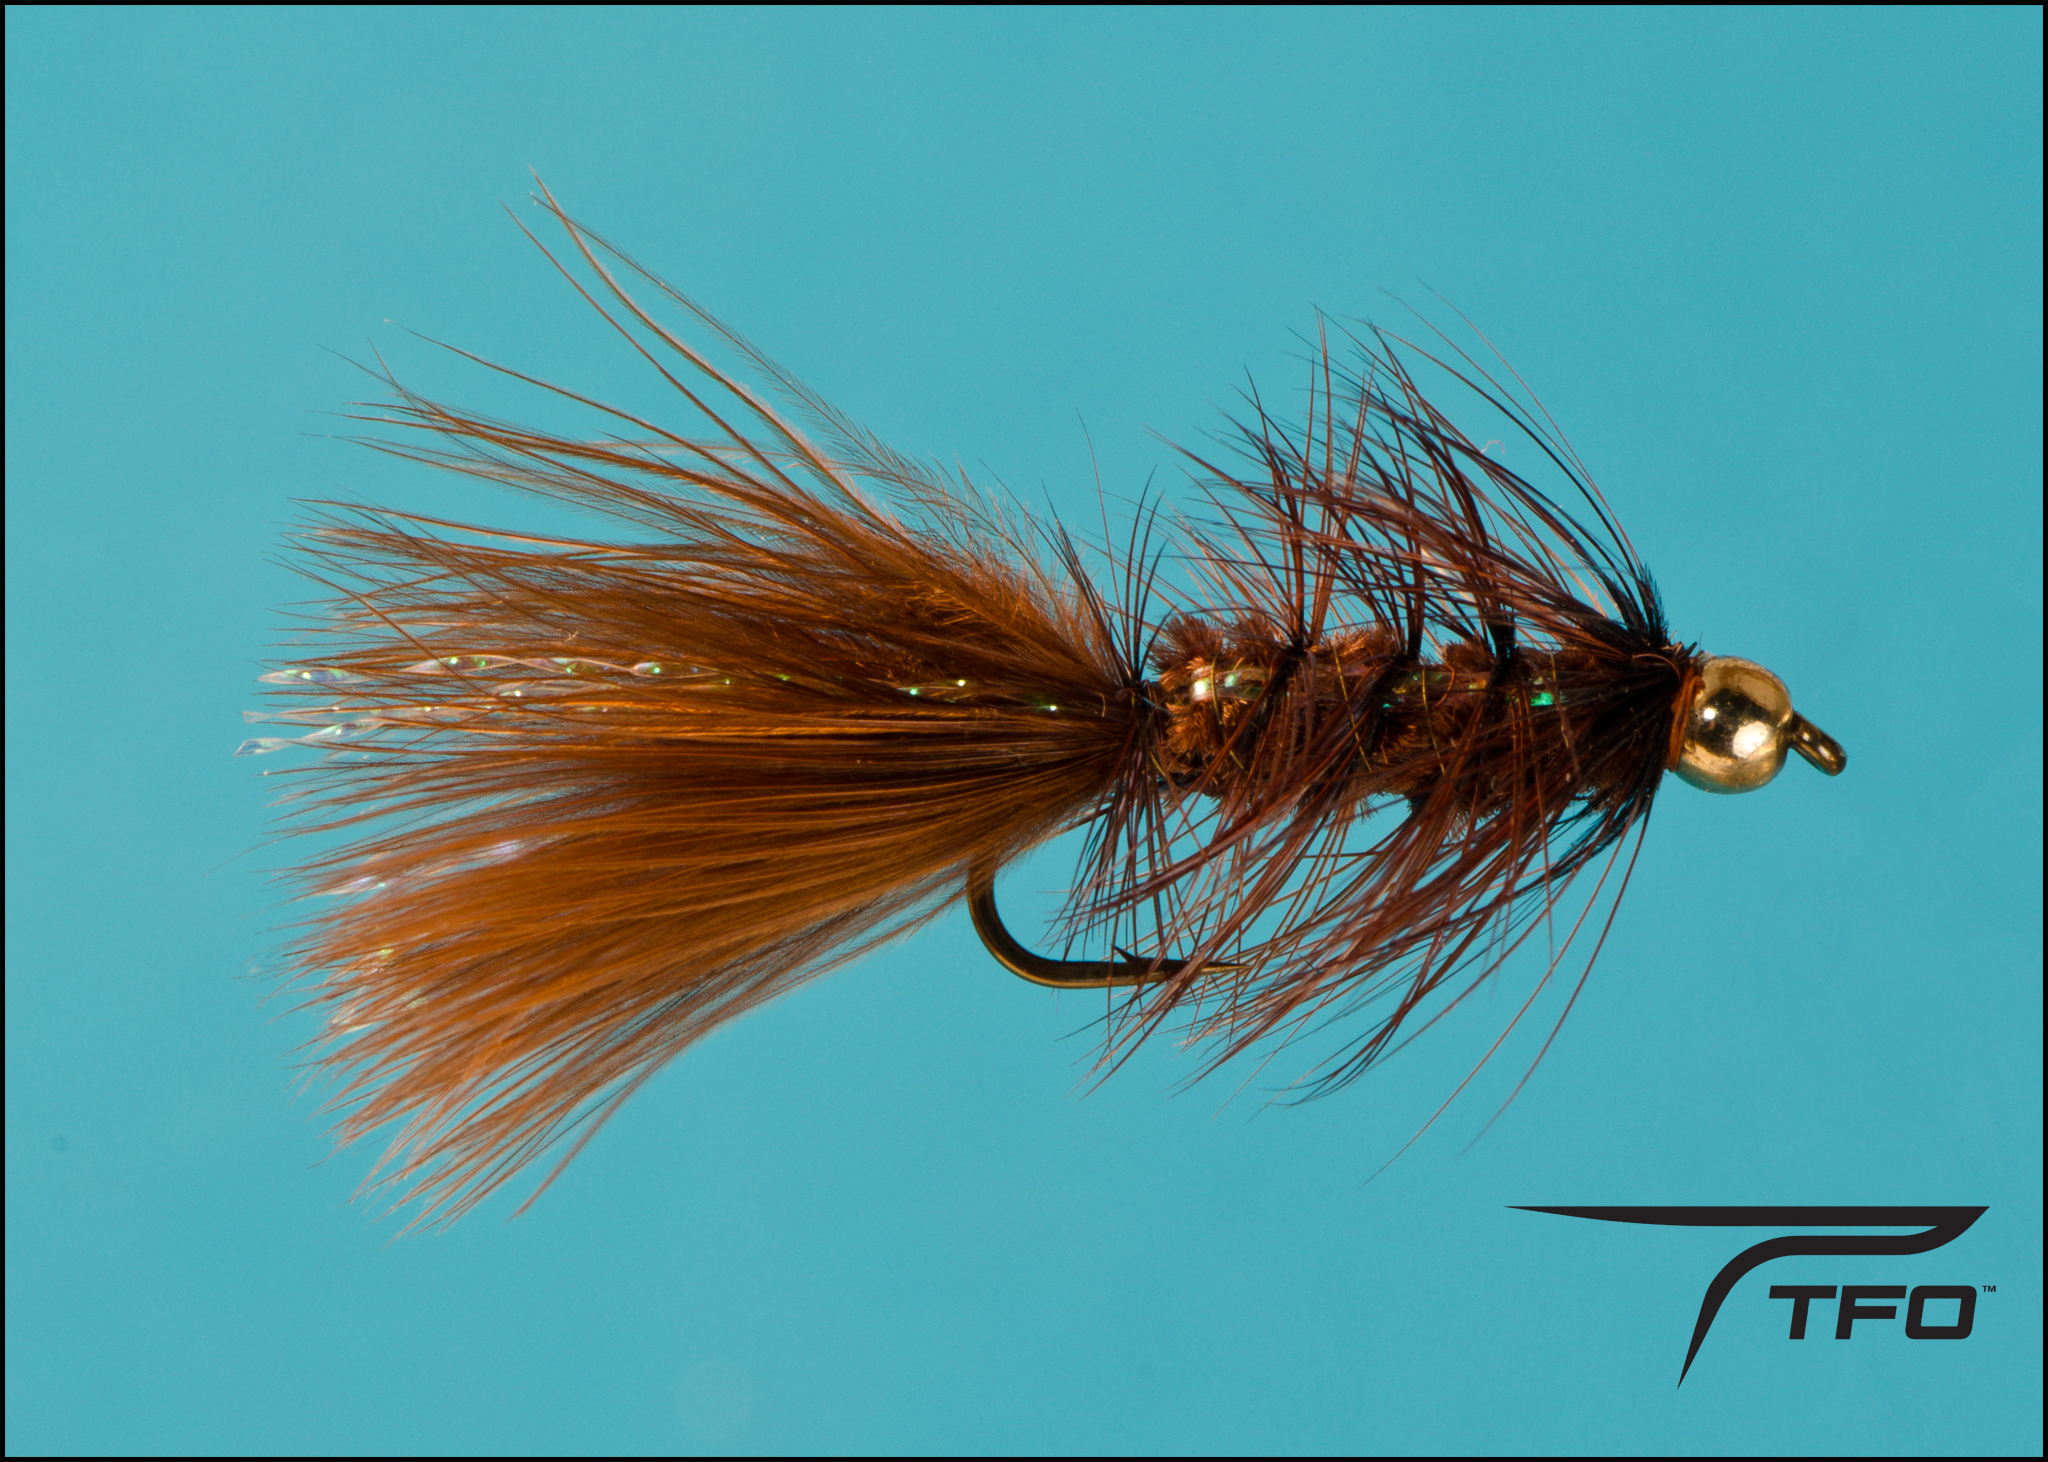 Bead Head Wooly Bugger Fly Fishing Flies for Trout, Bass and Panfish - 12pc  Handmade Multicolor Wet Flies for Freshwater Fishing (4, Olive/Brown)